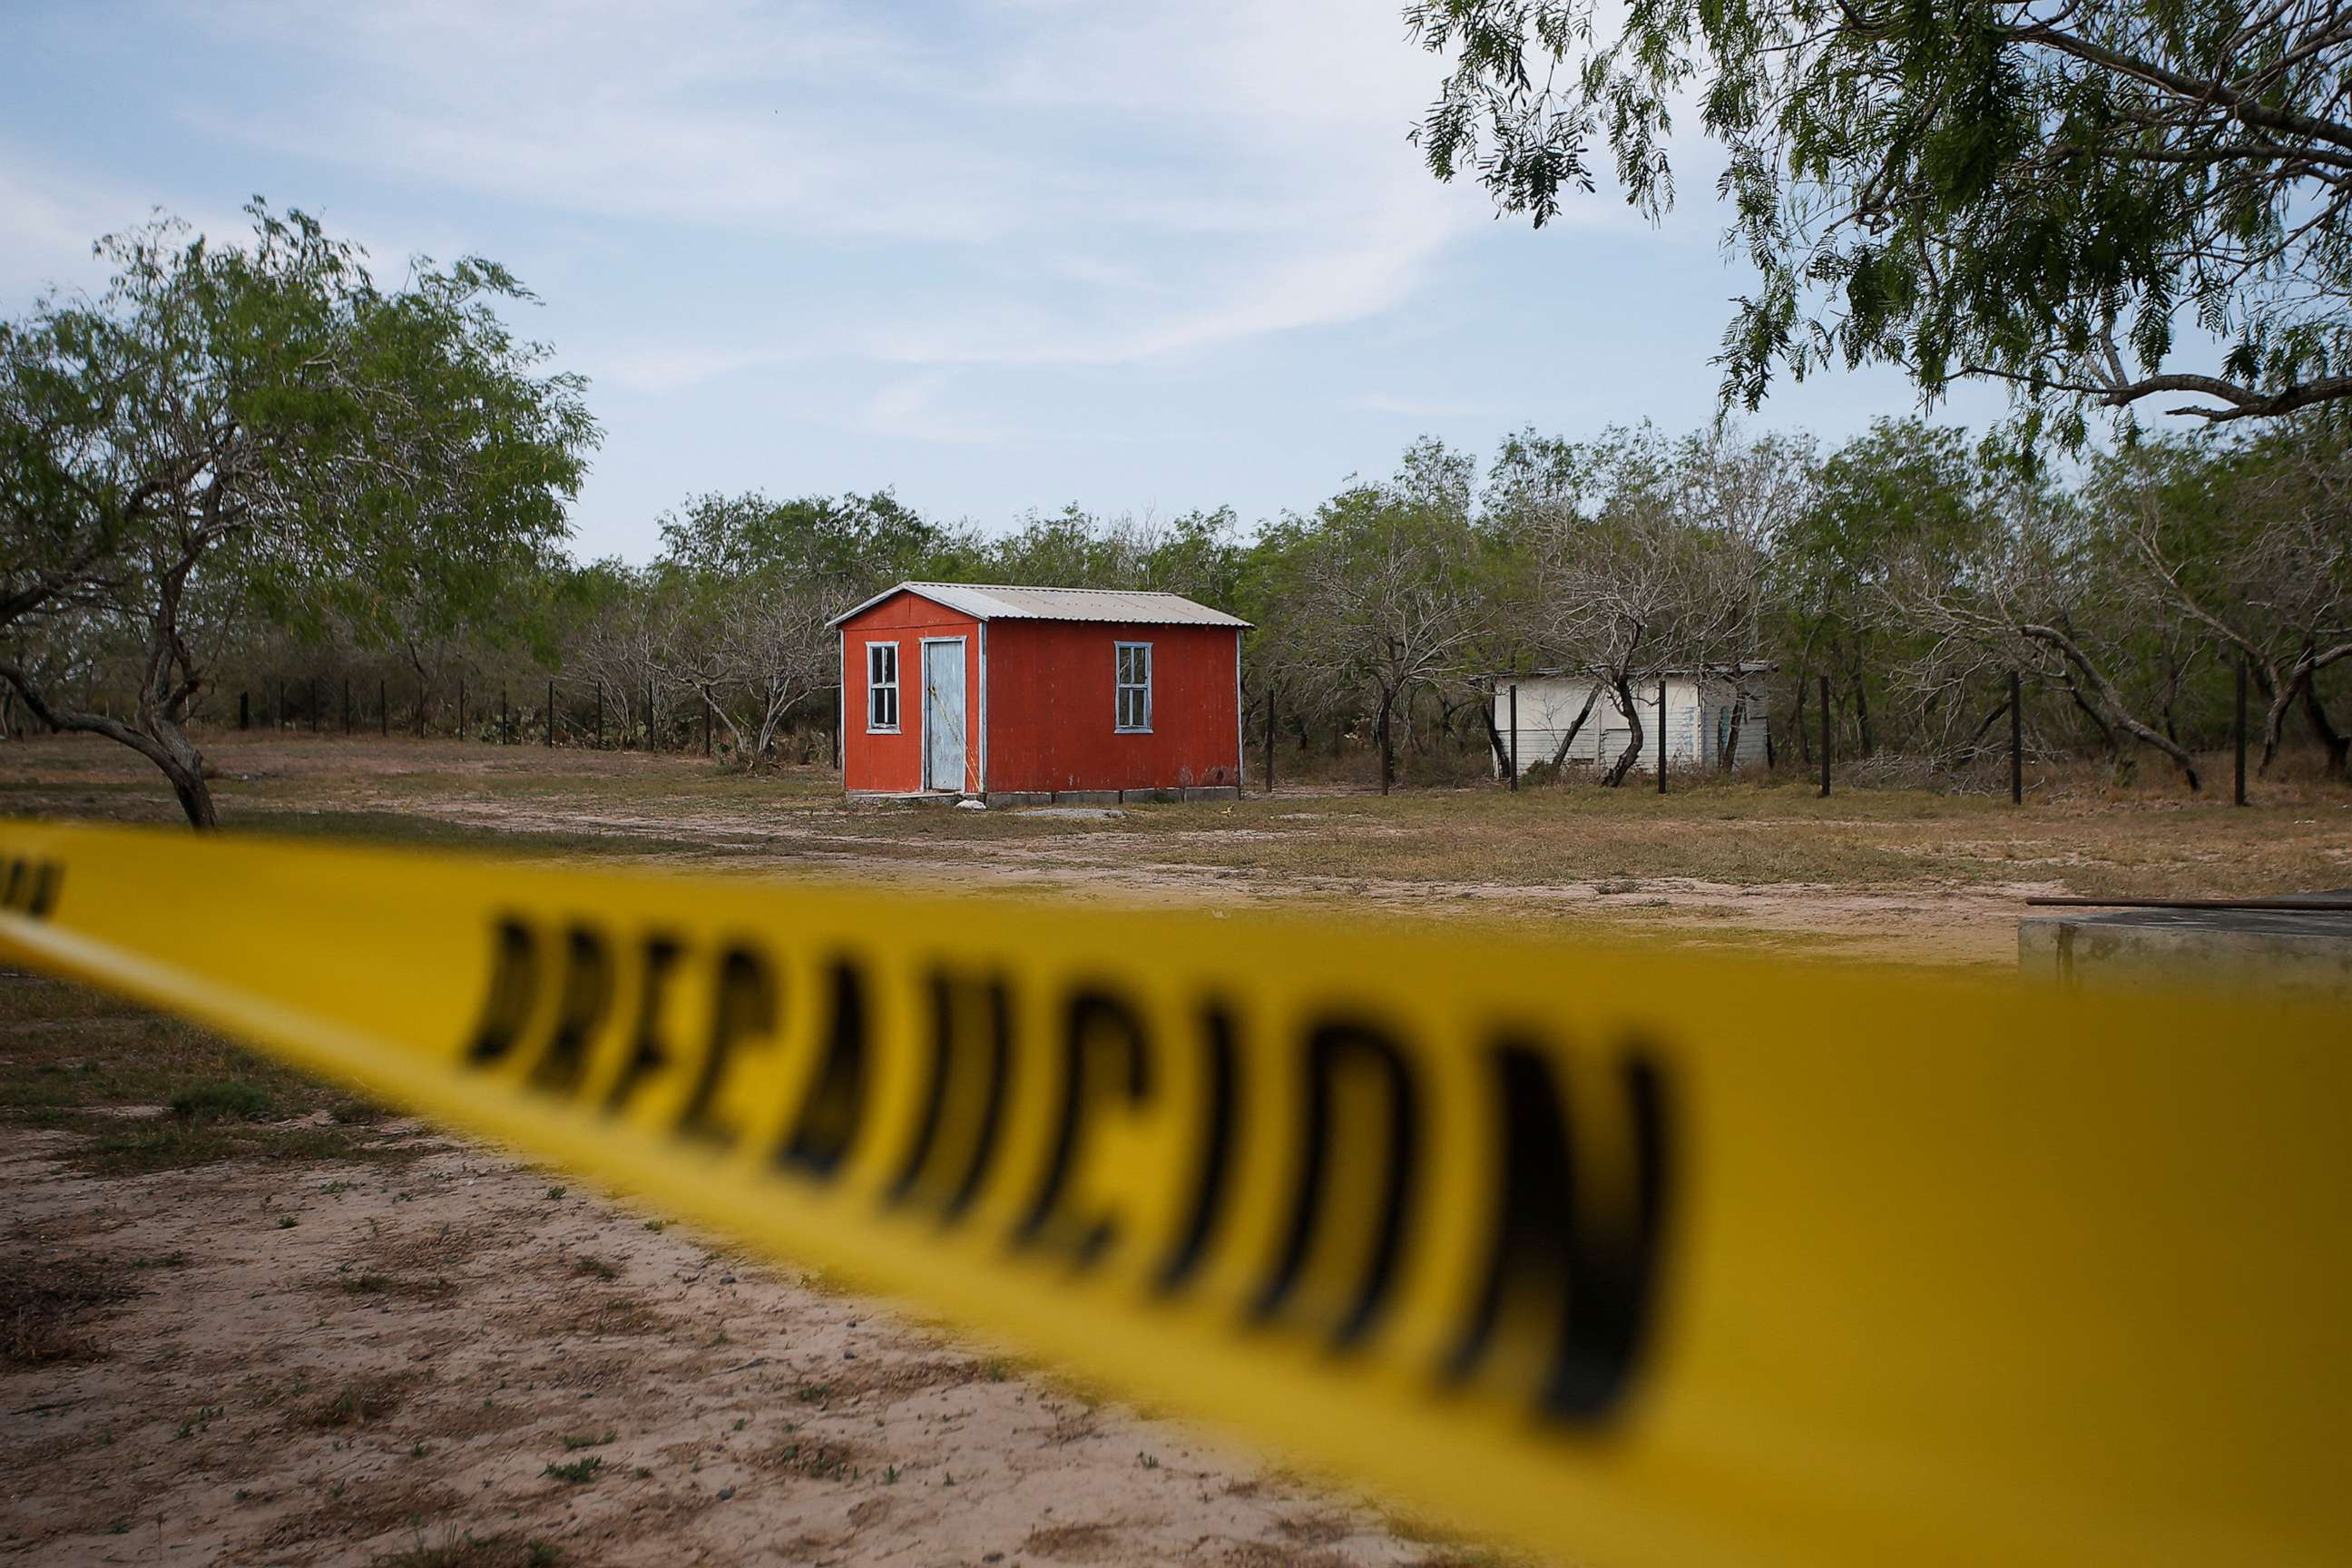 PHOTO: In this March 7, 2023, file photo, a storage shed is shown behind a police cordon, at the scene where authorities found the bodies of two of four Americans kidnapped by gunmen, in Matamoros, Mexico.